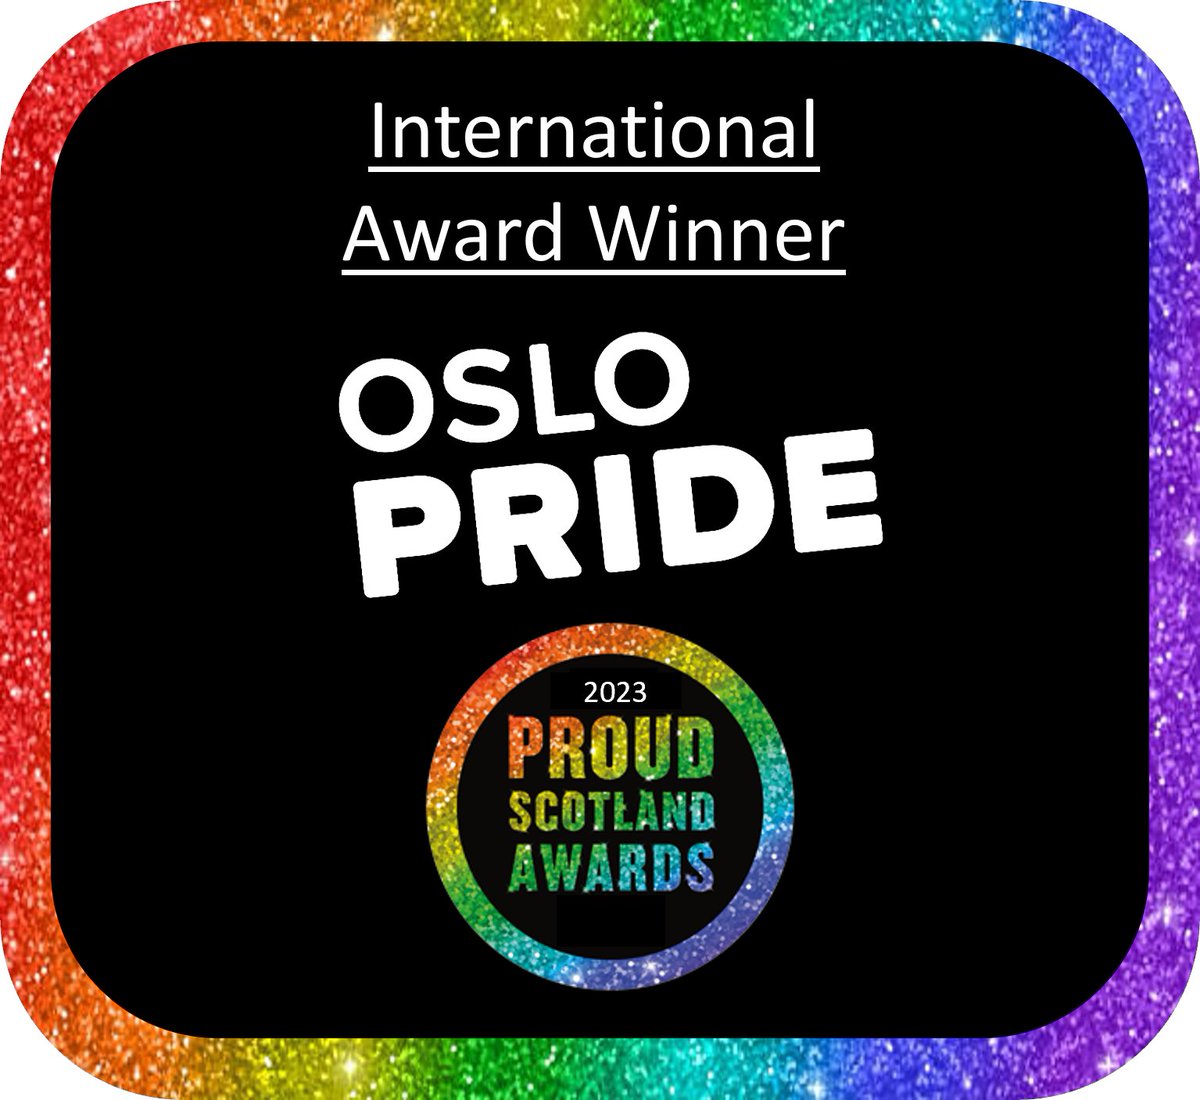 Congratulations to @OsloPride on receiving the #ProudScotlandAwards #2023 International Award!
From what you experienced last year, Scotland is here to stand with you and all of the members of our community across the world! #ProudScotlandAwards #International #standAsOne